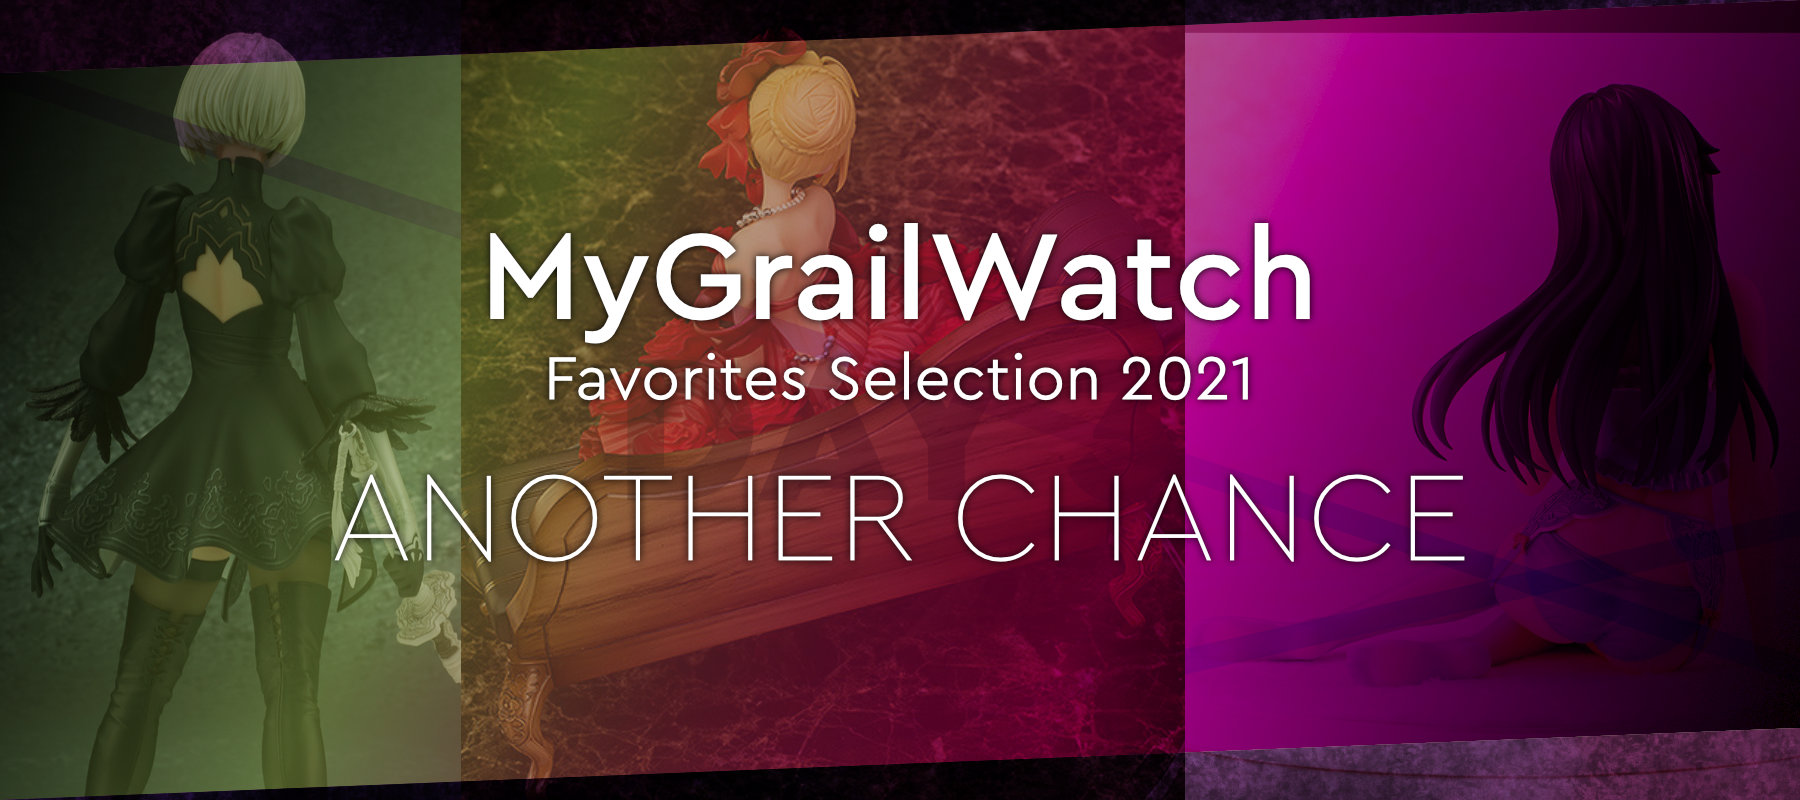 MGW-Favorites-Selection-2021-Another-Chance